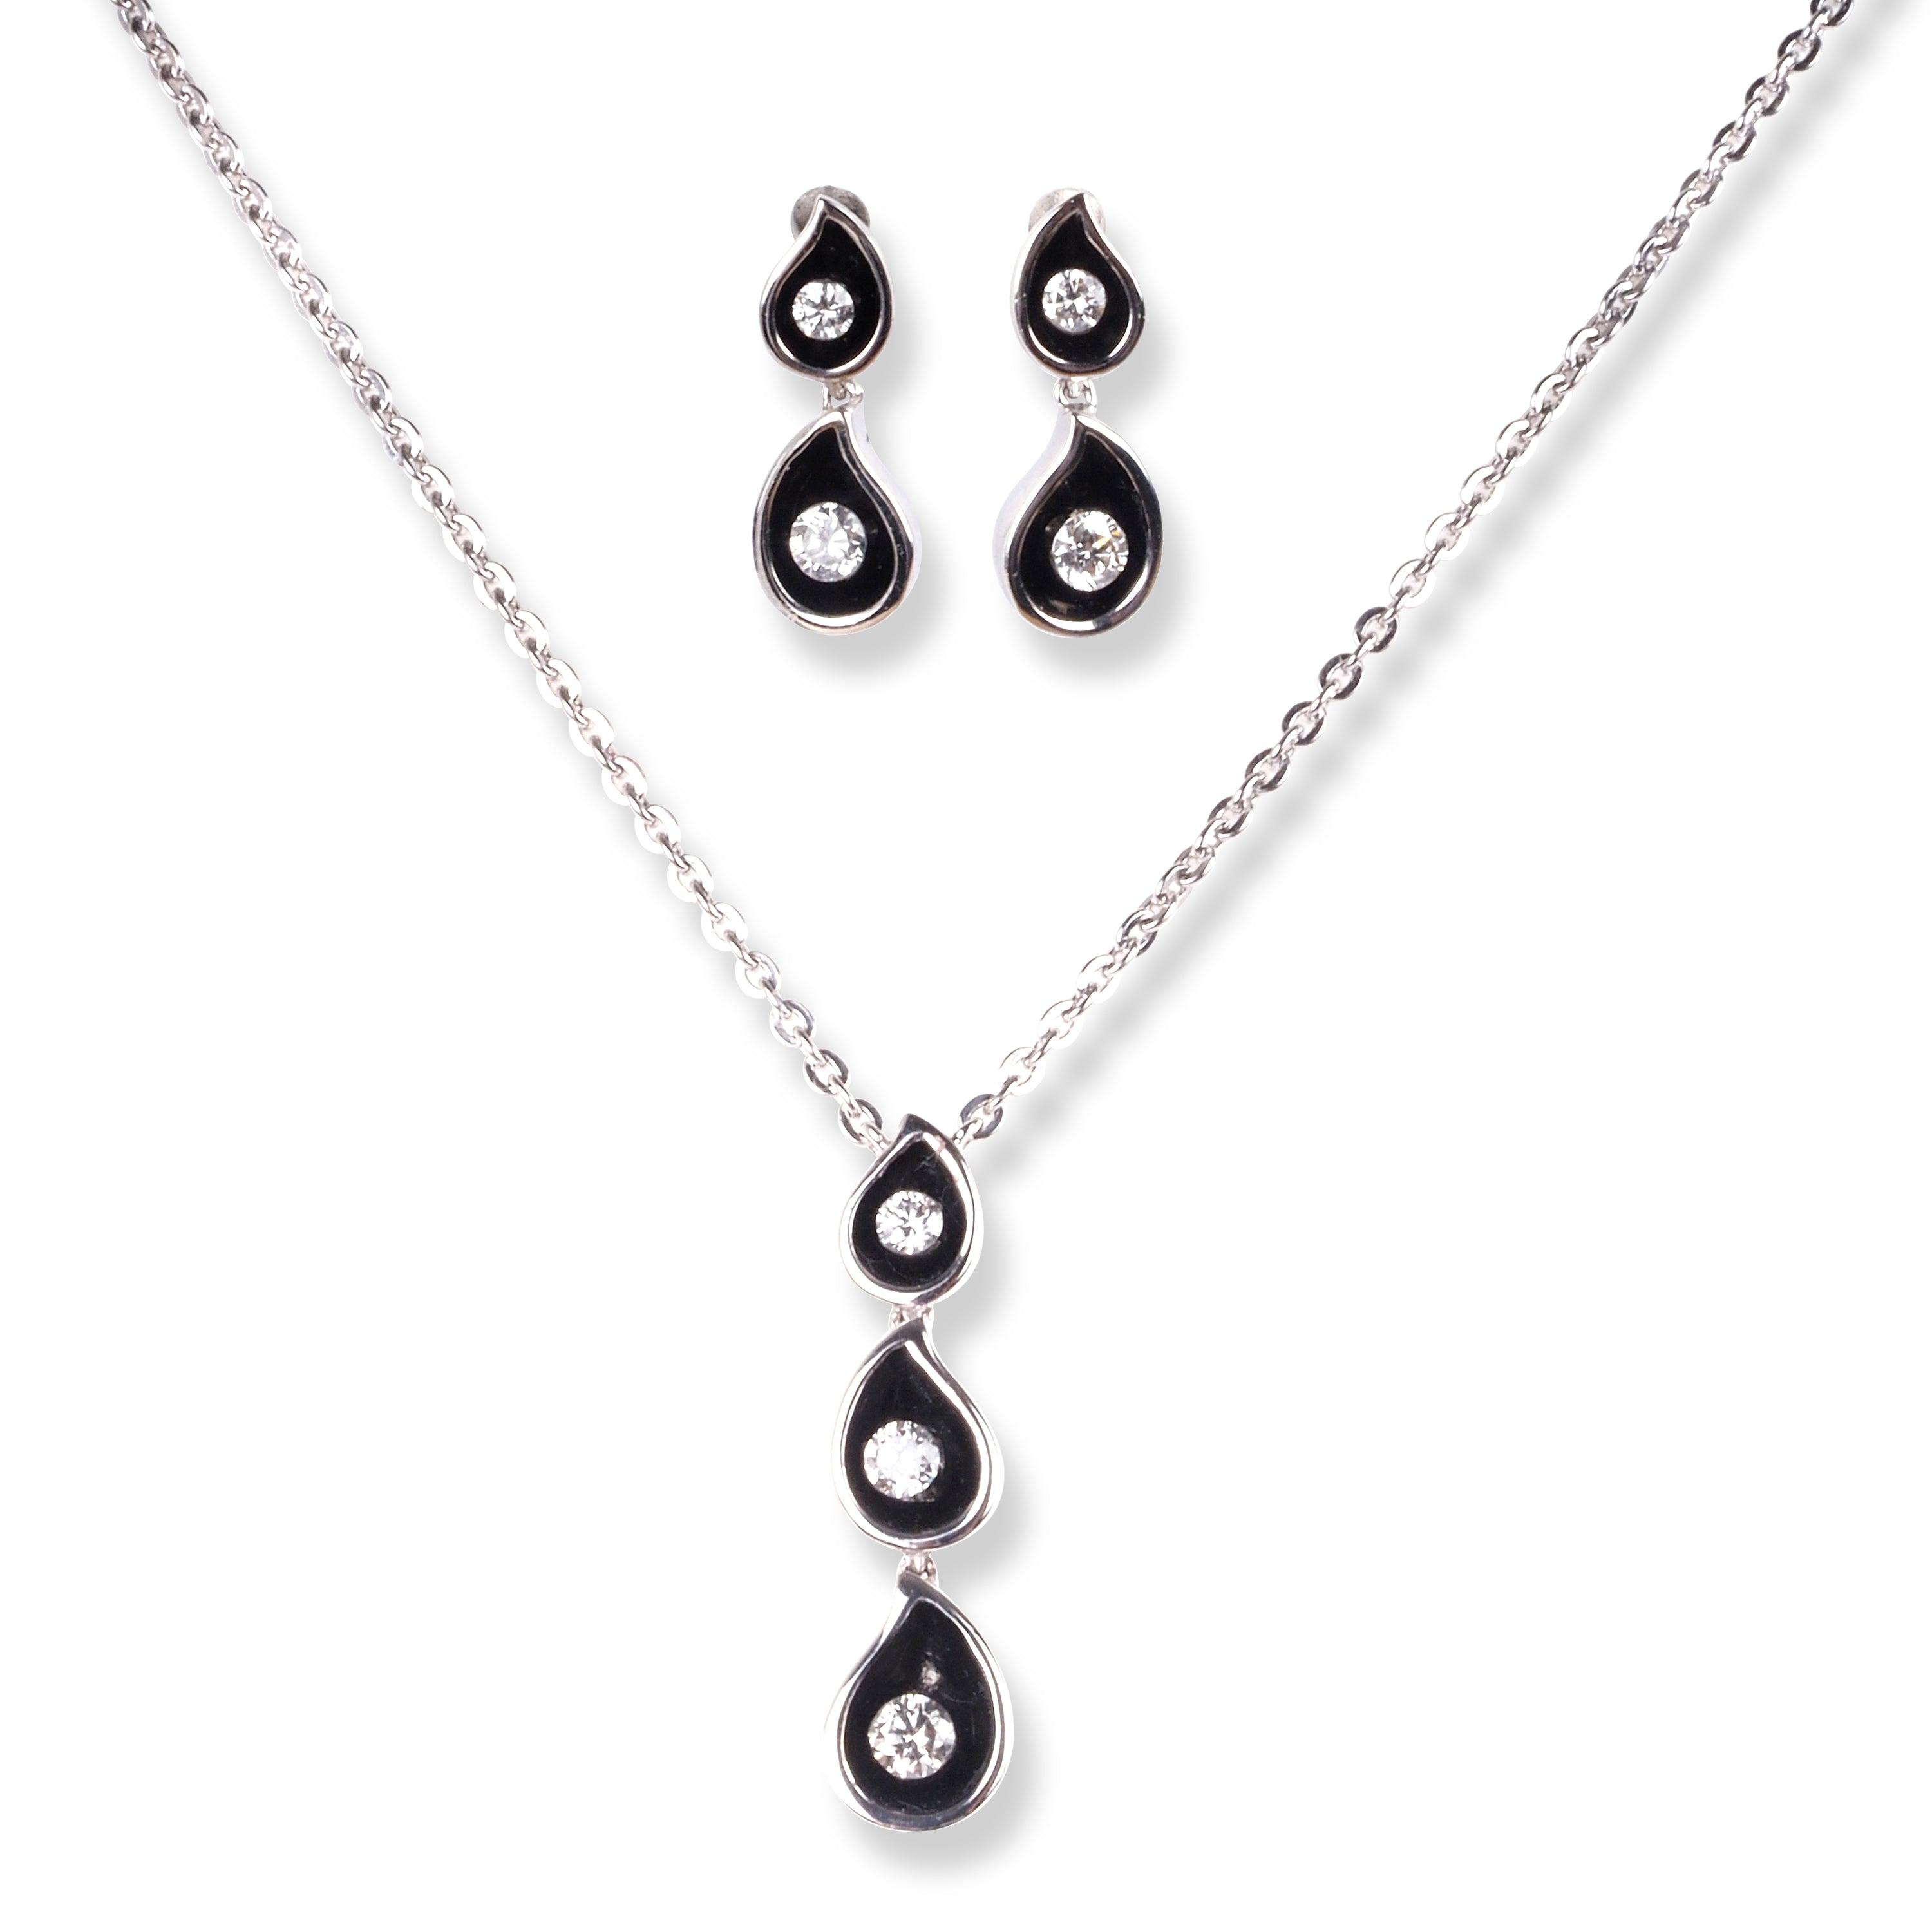 18ct White Gold Diamond Set (Necklace + Earrings) - Minar Jewellers